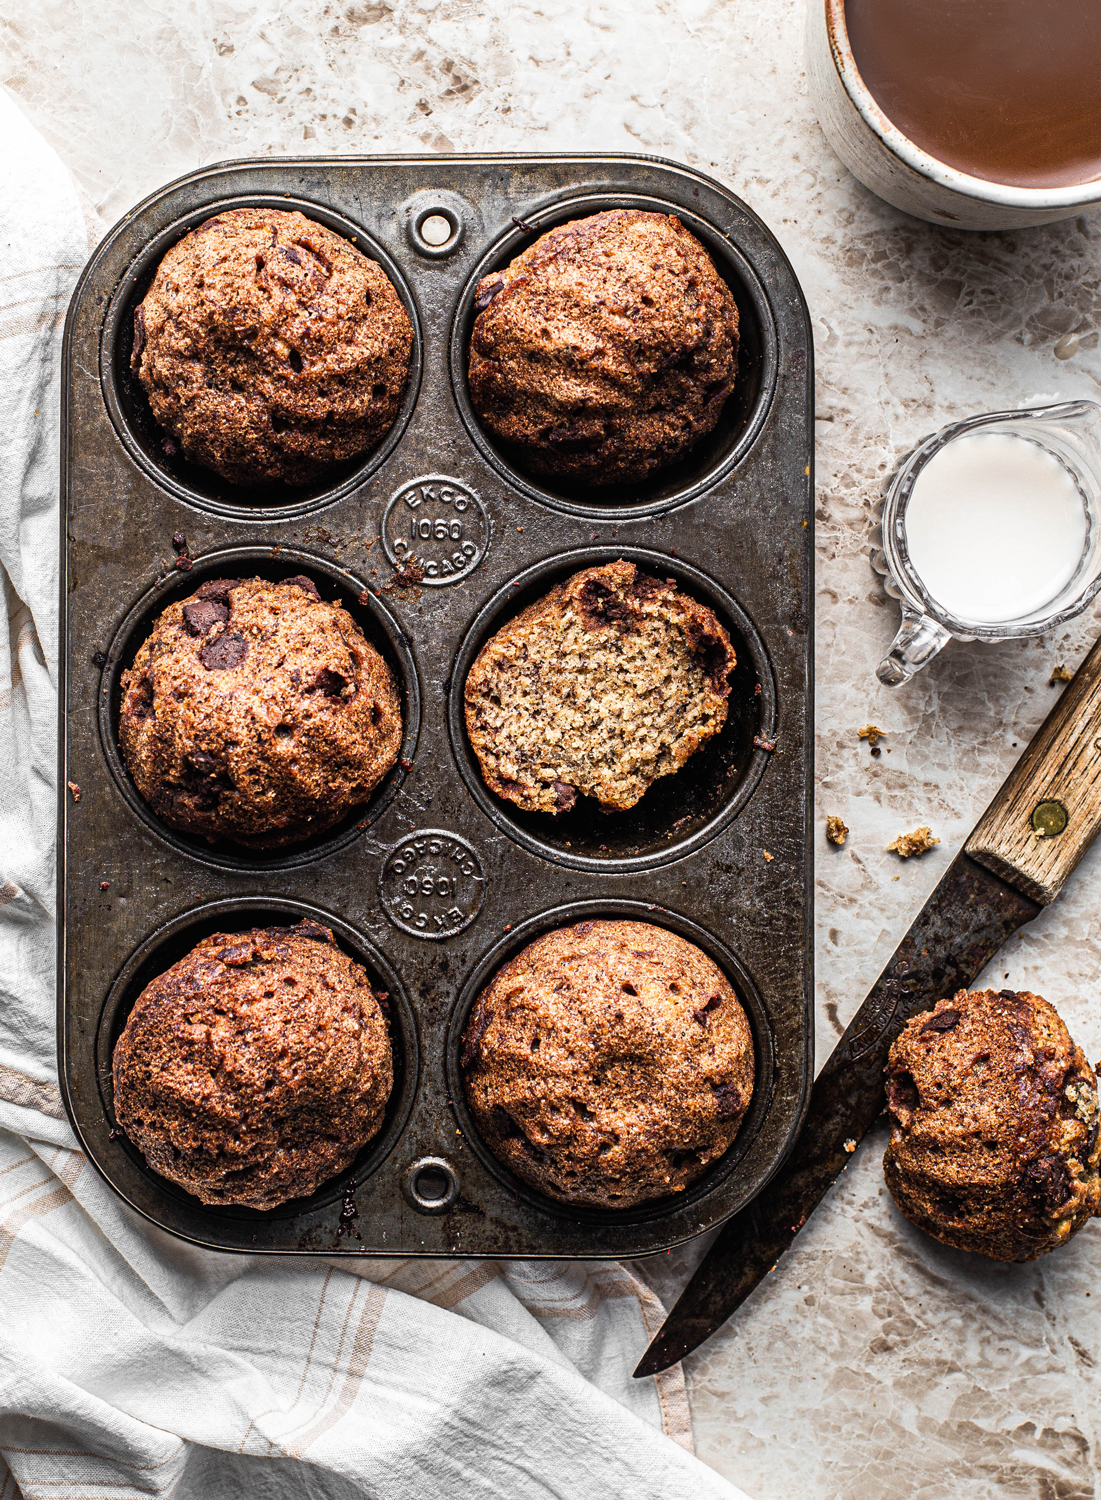 Chocolate Chip Muffins in a vintage muffin pan food photography with coffee and milk